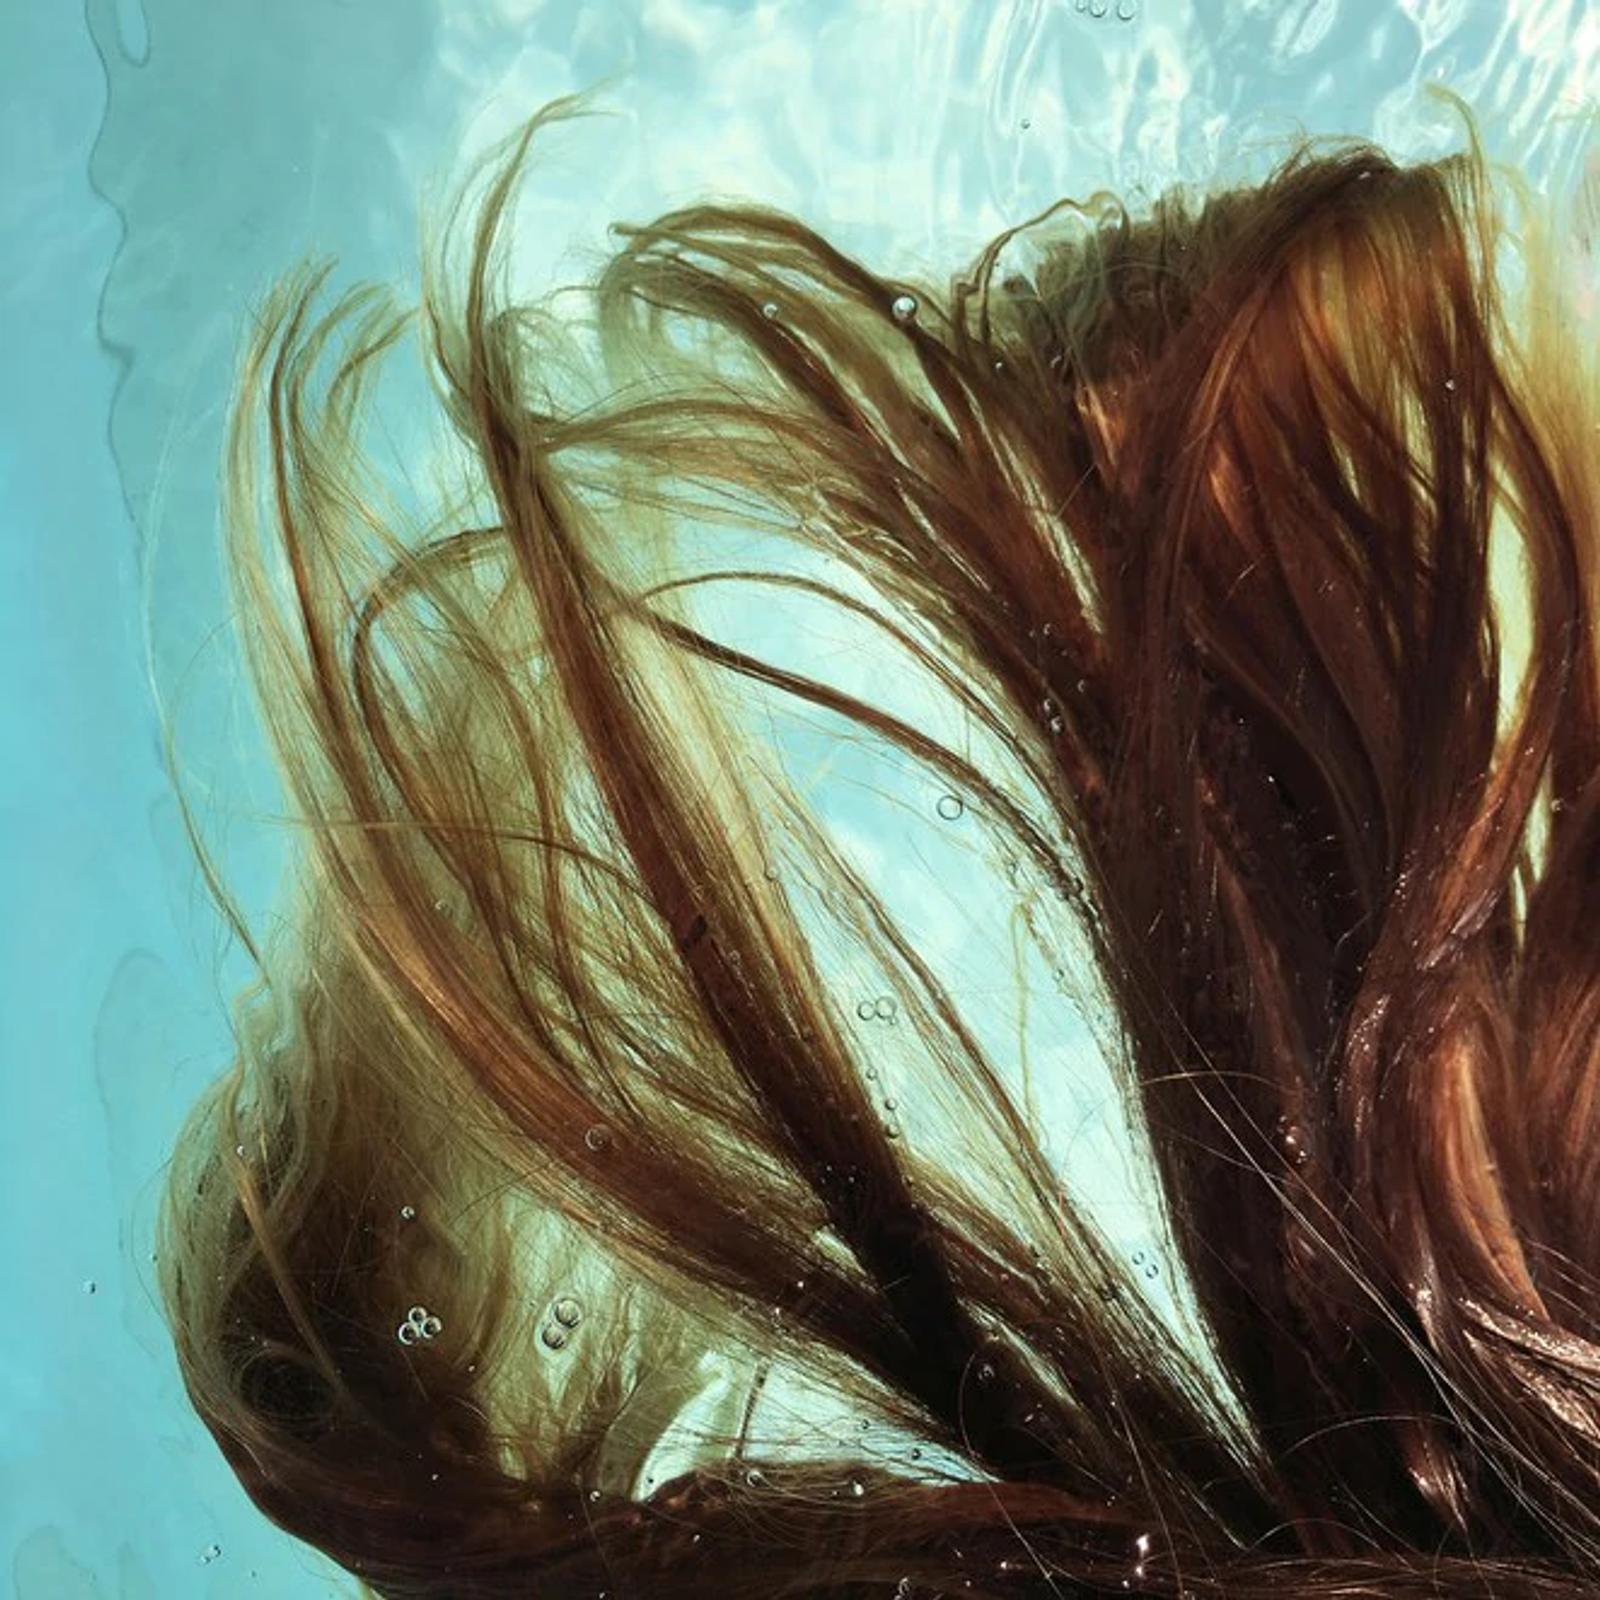 Image of Long Hair Under Water